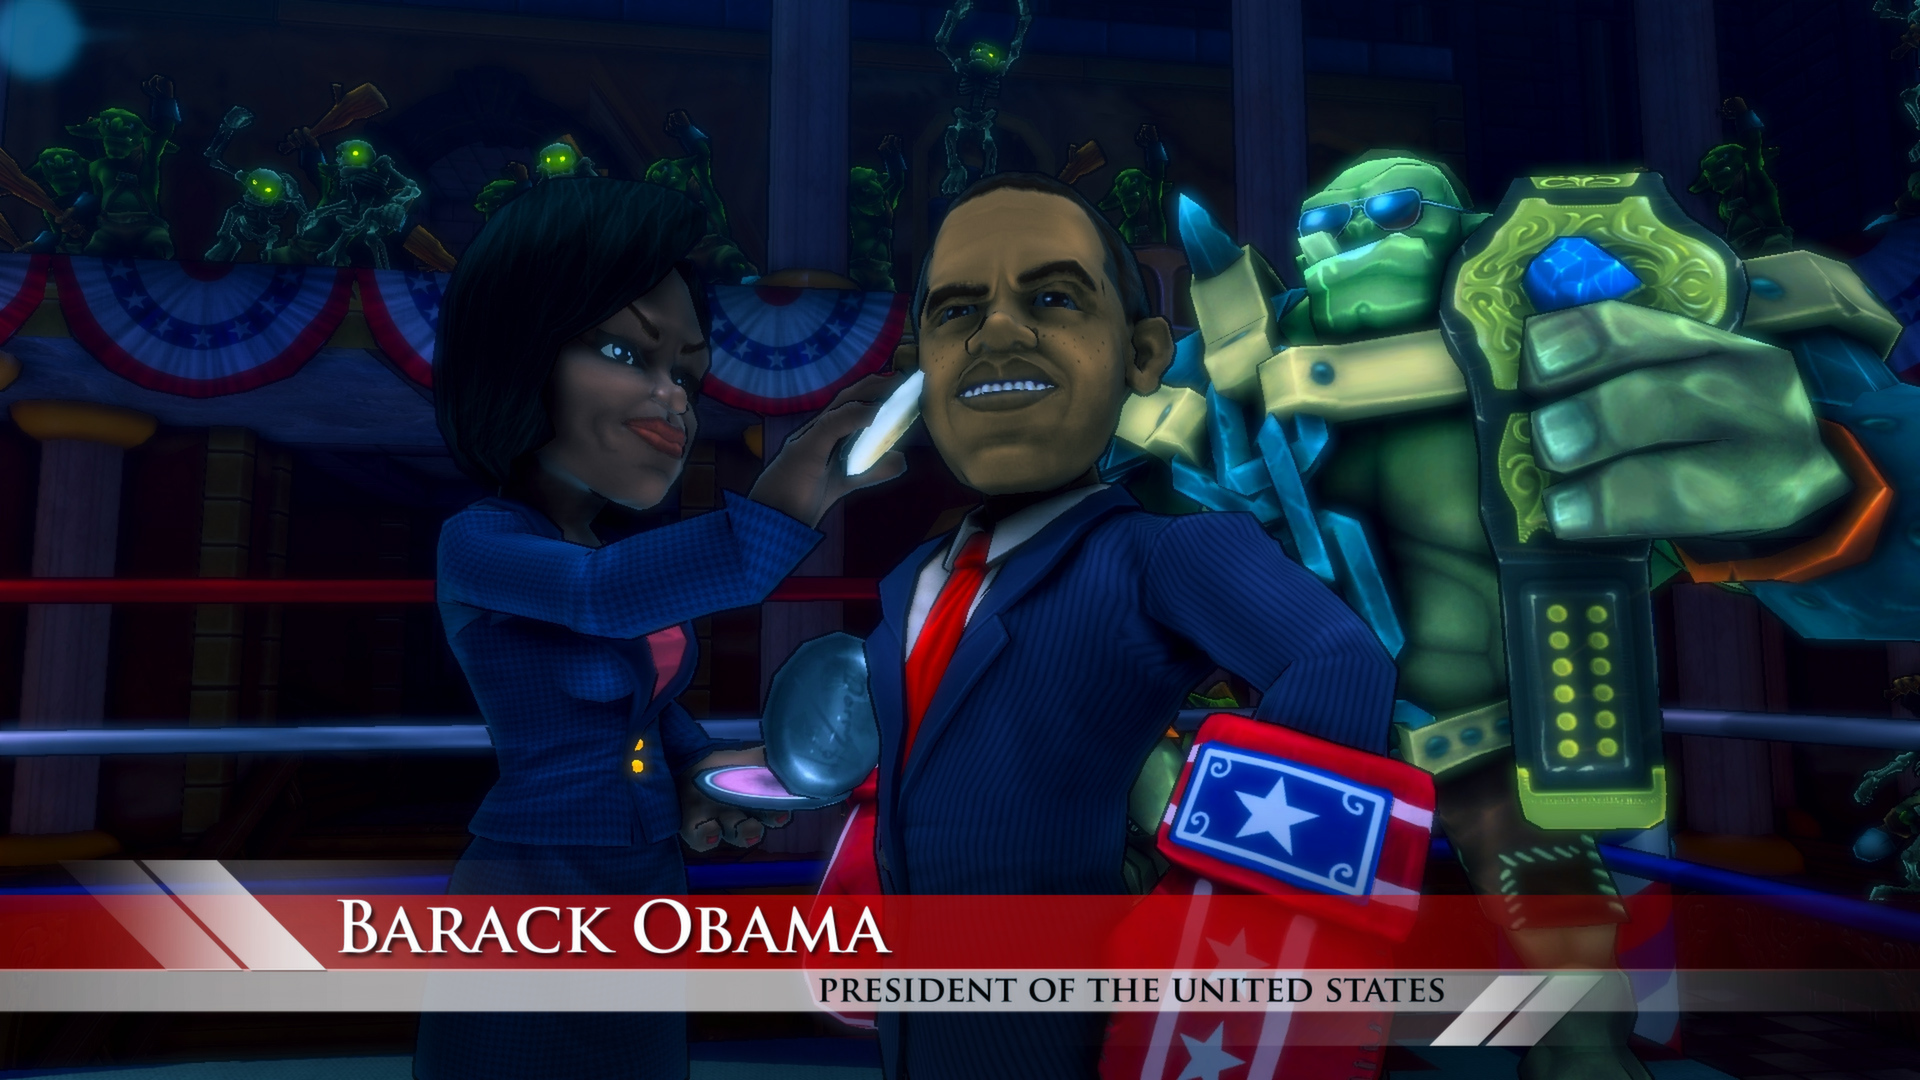 Dungeon Defenders - President's Day Surprise Featured Screenshot #1